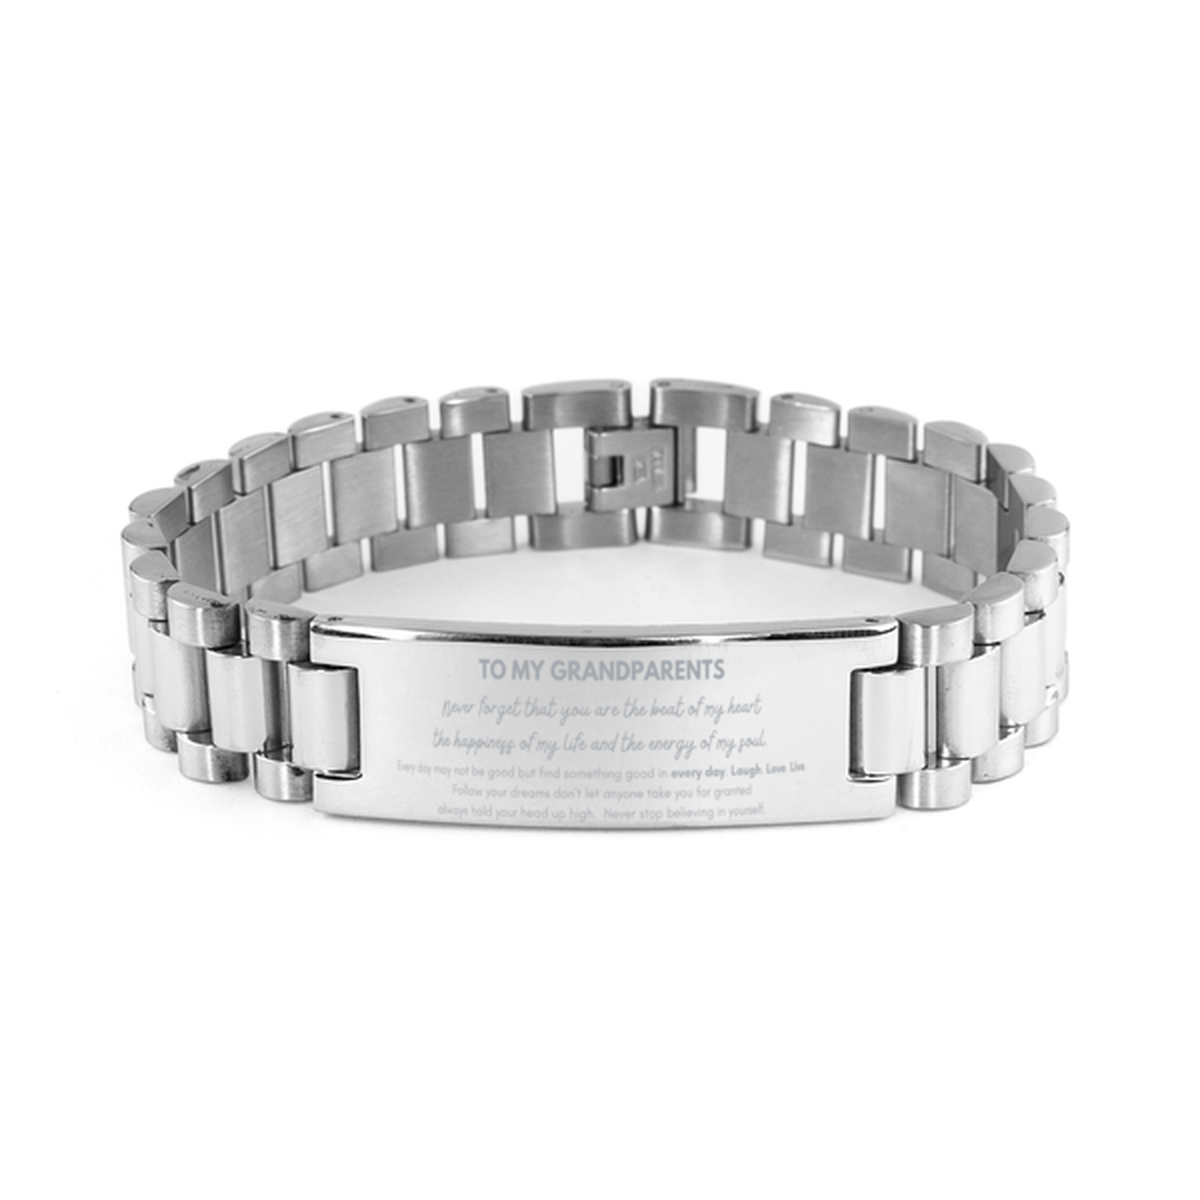 To My Grandparents Bracelet Gifts, Christmas Grandparents Ladder Stainless Steel Bracelet Present, Birthday Unique Motivational For Grandparents, To My Grandparents Never forget that you are the beat of my heart the happiness of my life and the energy of